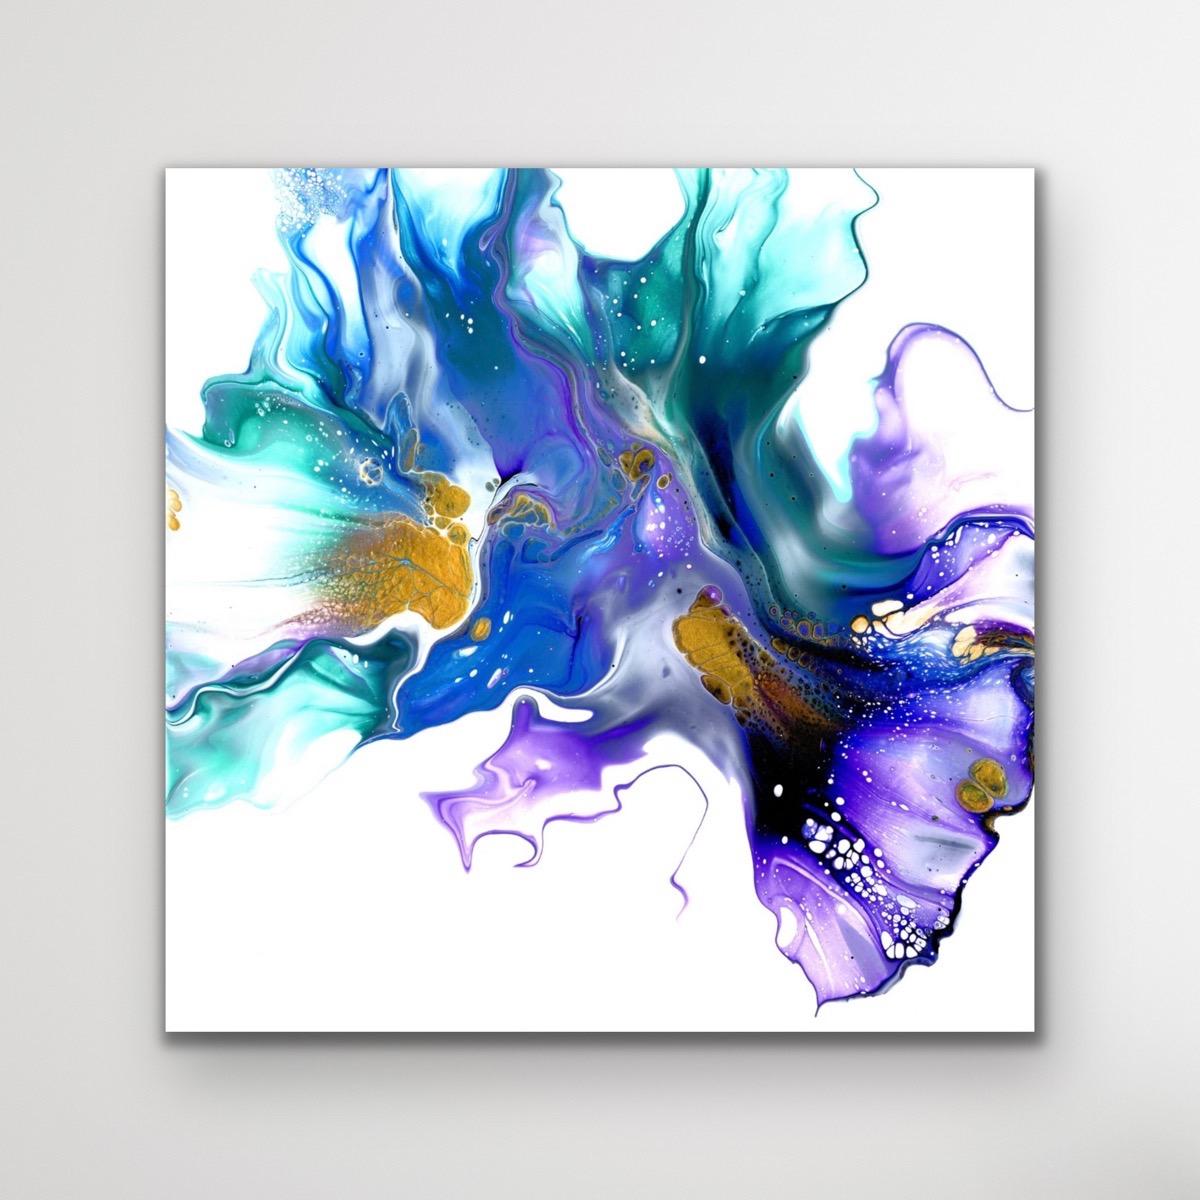 Modern Abstract Fluid Art Painting, Contemporary Giclee Print, LE Artist Signed 